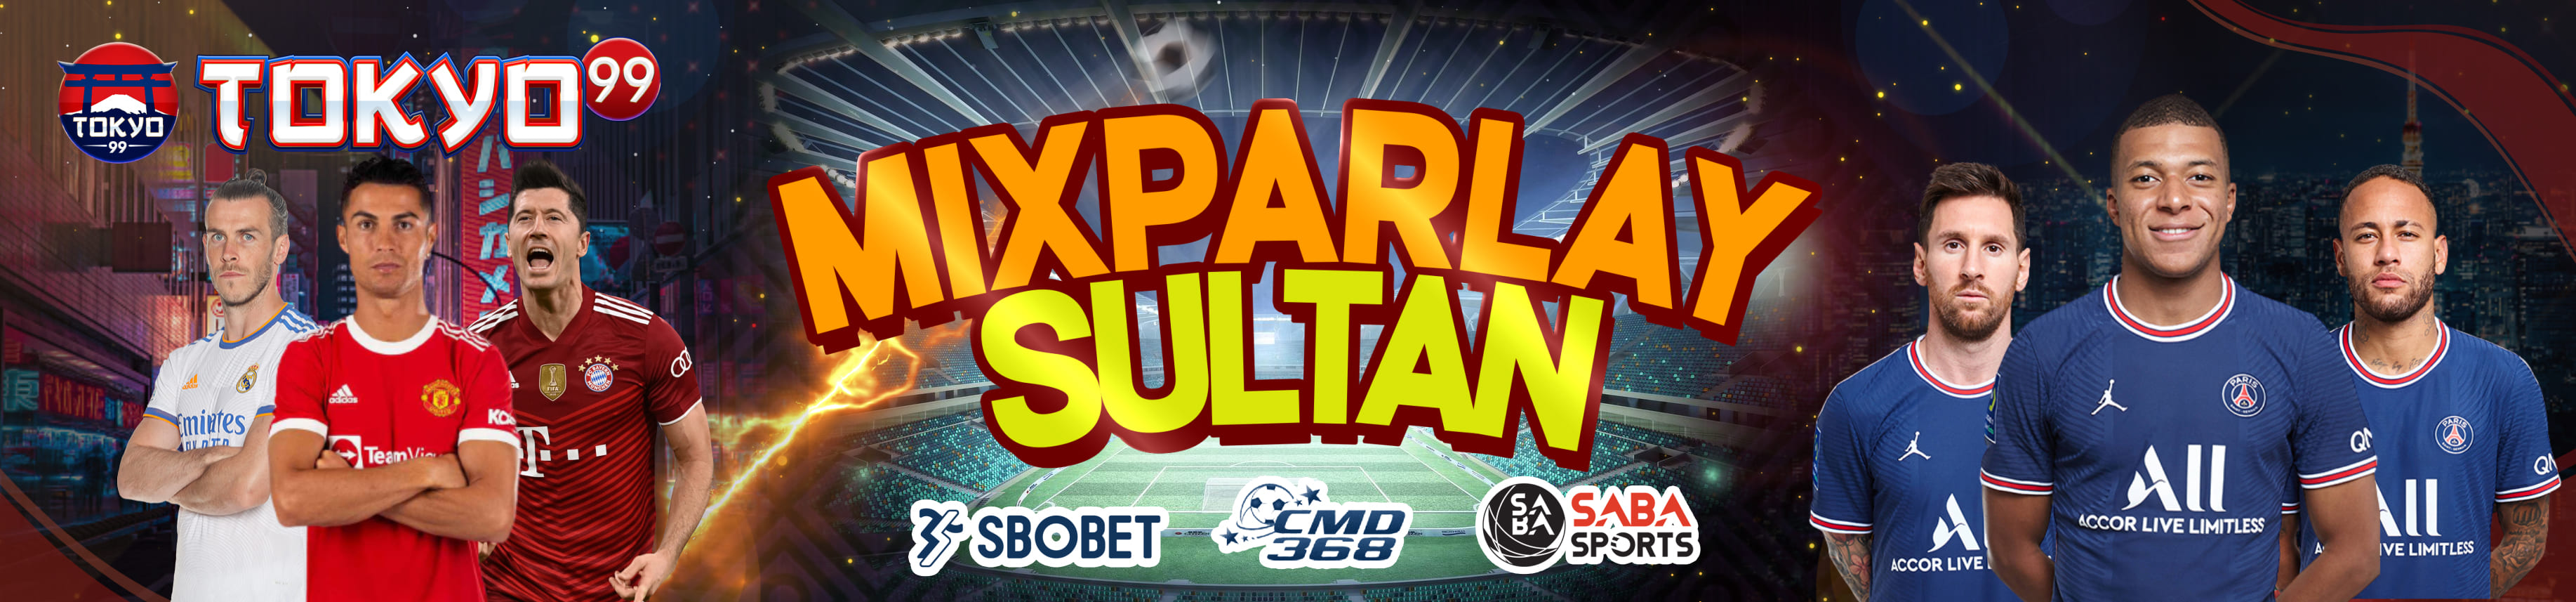 MIX PARLAY SULTAN